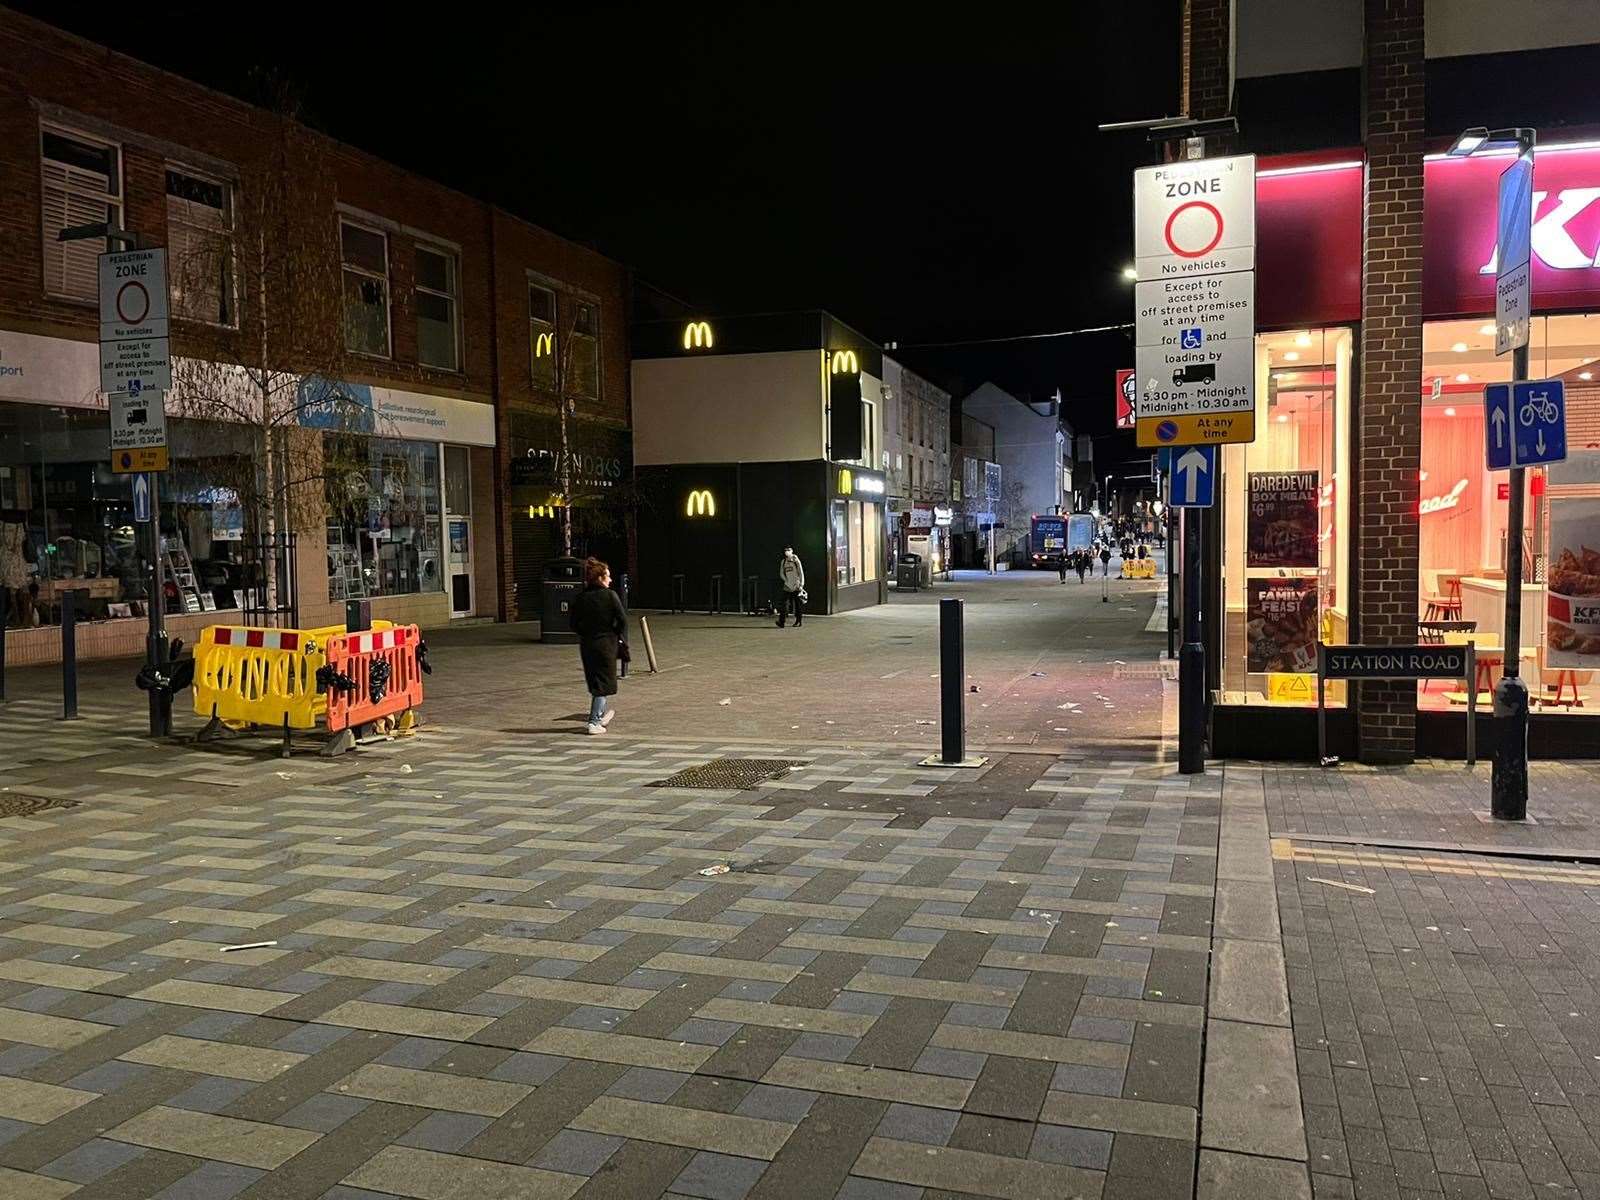 Police patrolled Maidstone town centre after months of trouble in certain parts of town